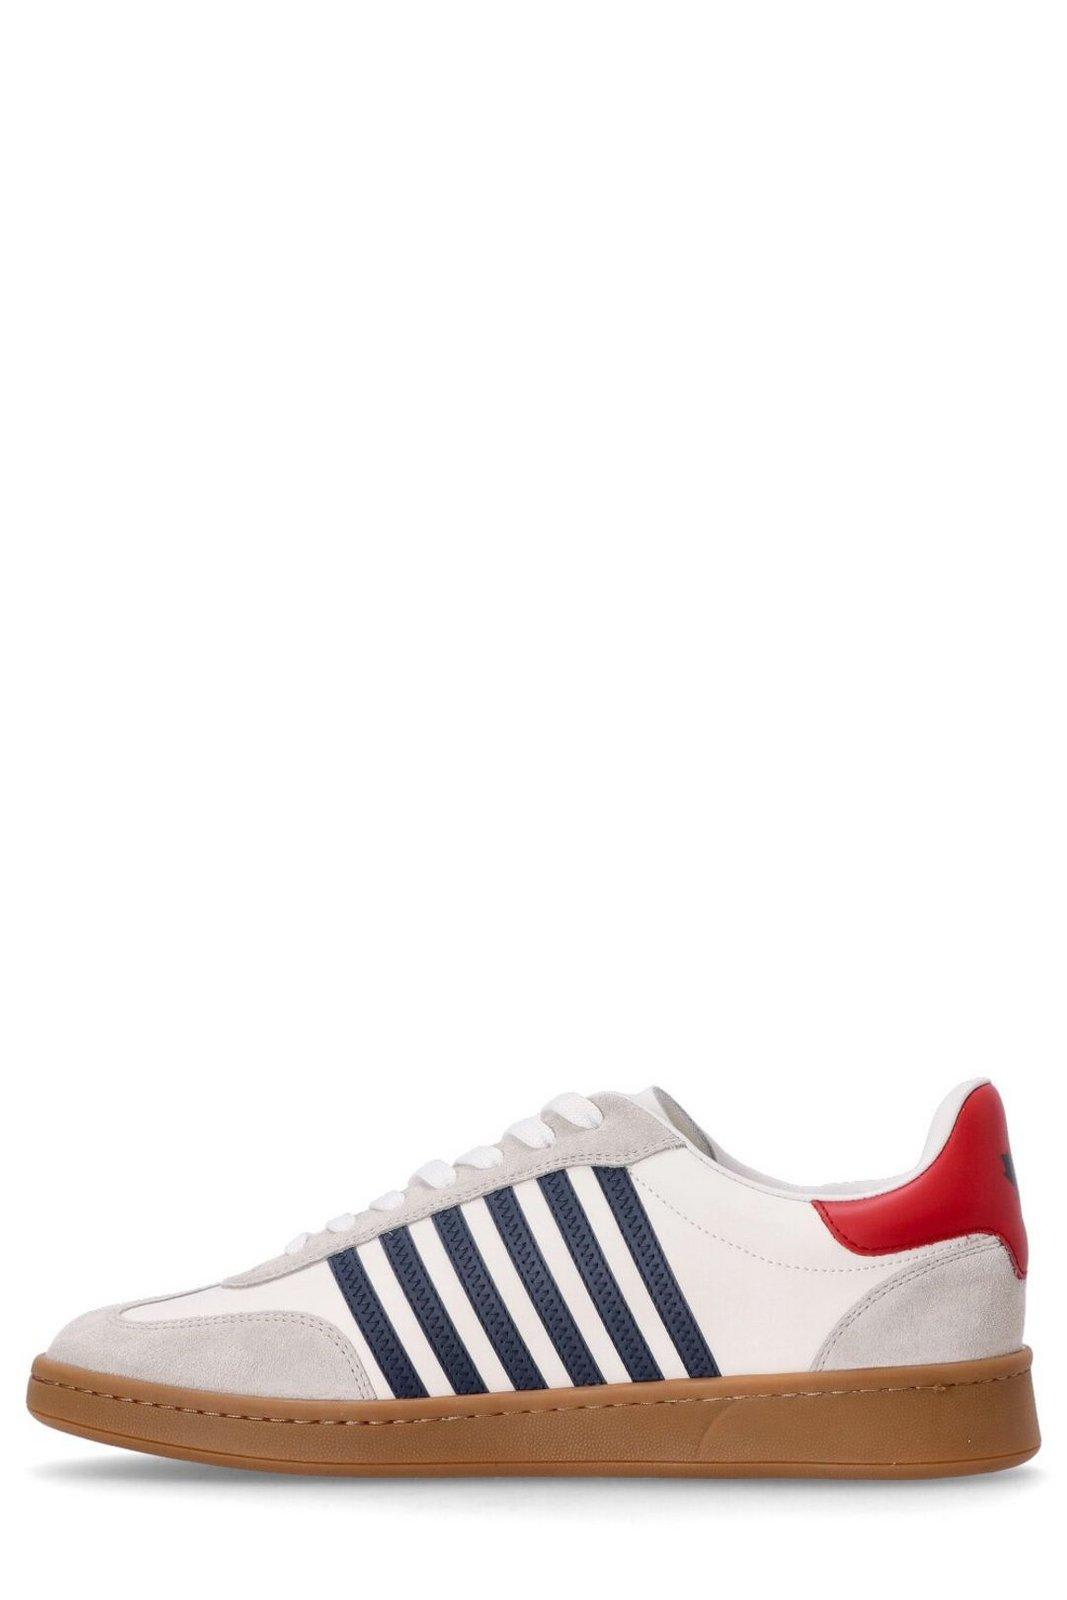 Shop Dsquared2 Round Toe Low-top Sneakers In White Blue Red